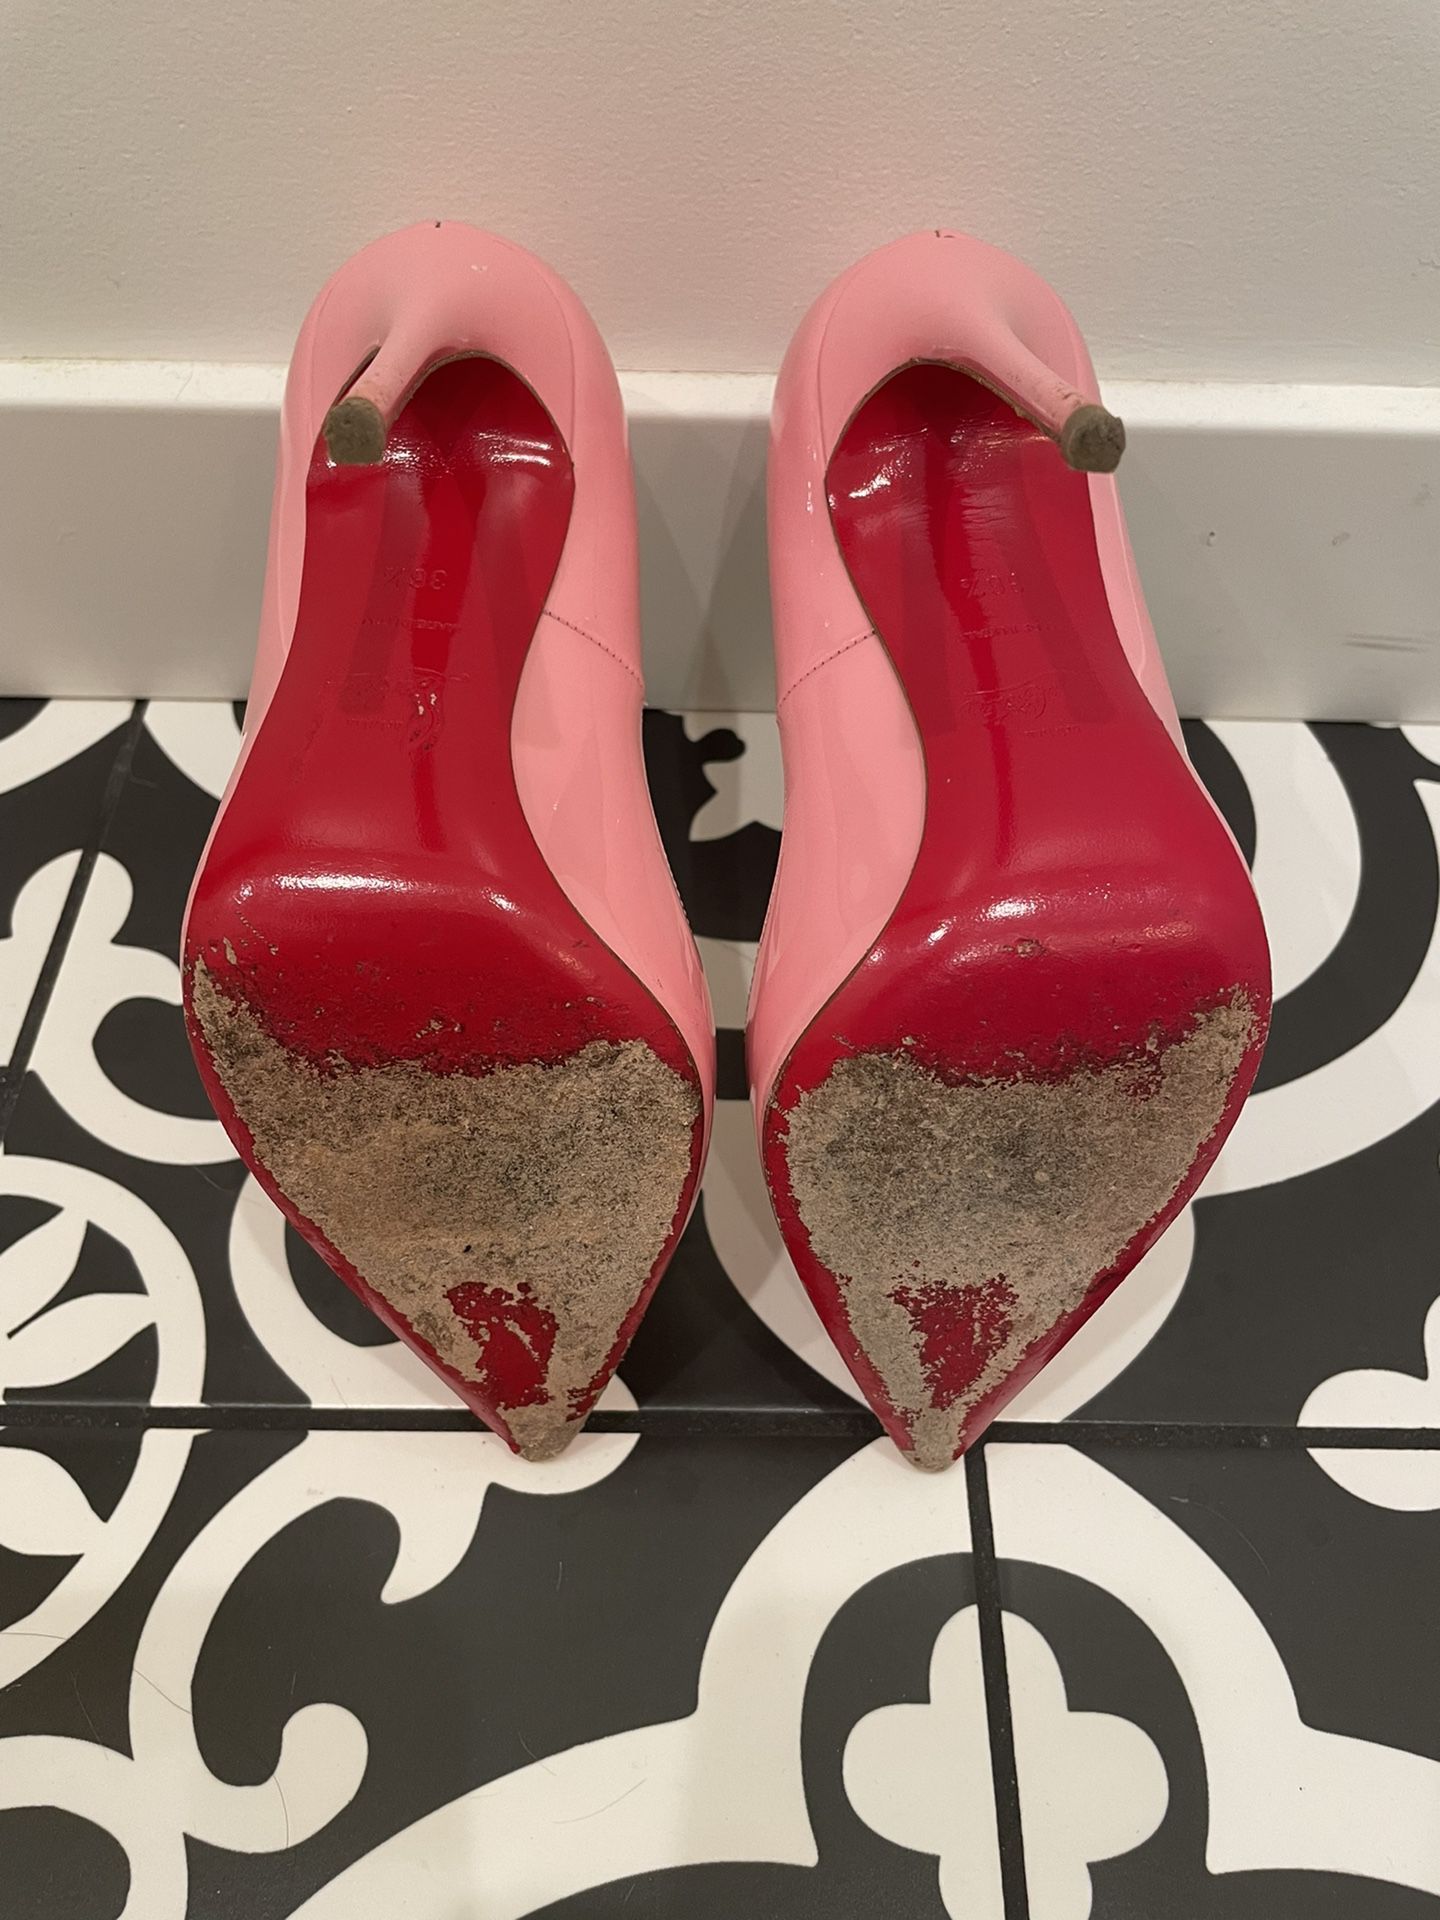 Christian Louboutin Pink Patent Pigalle 120 Heels. Size 36.5.